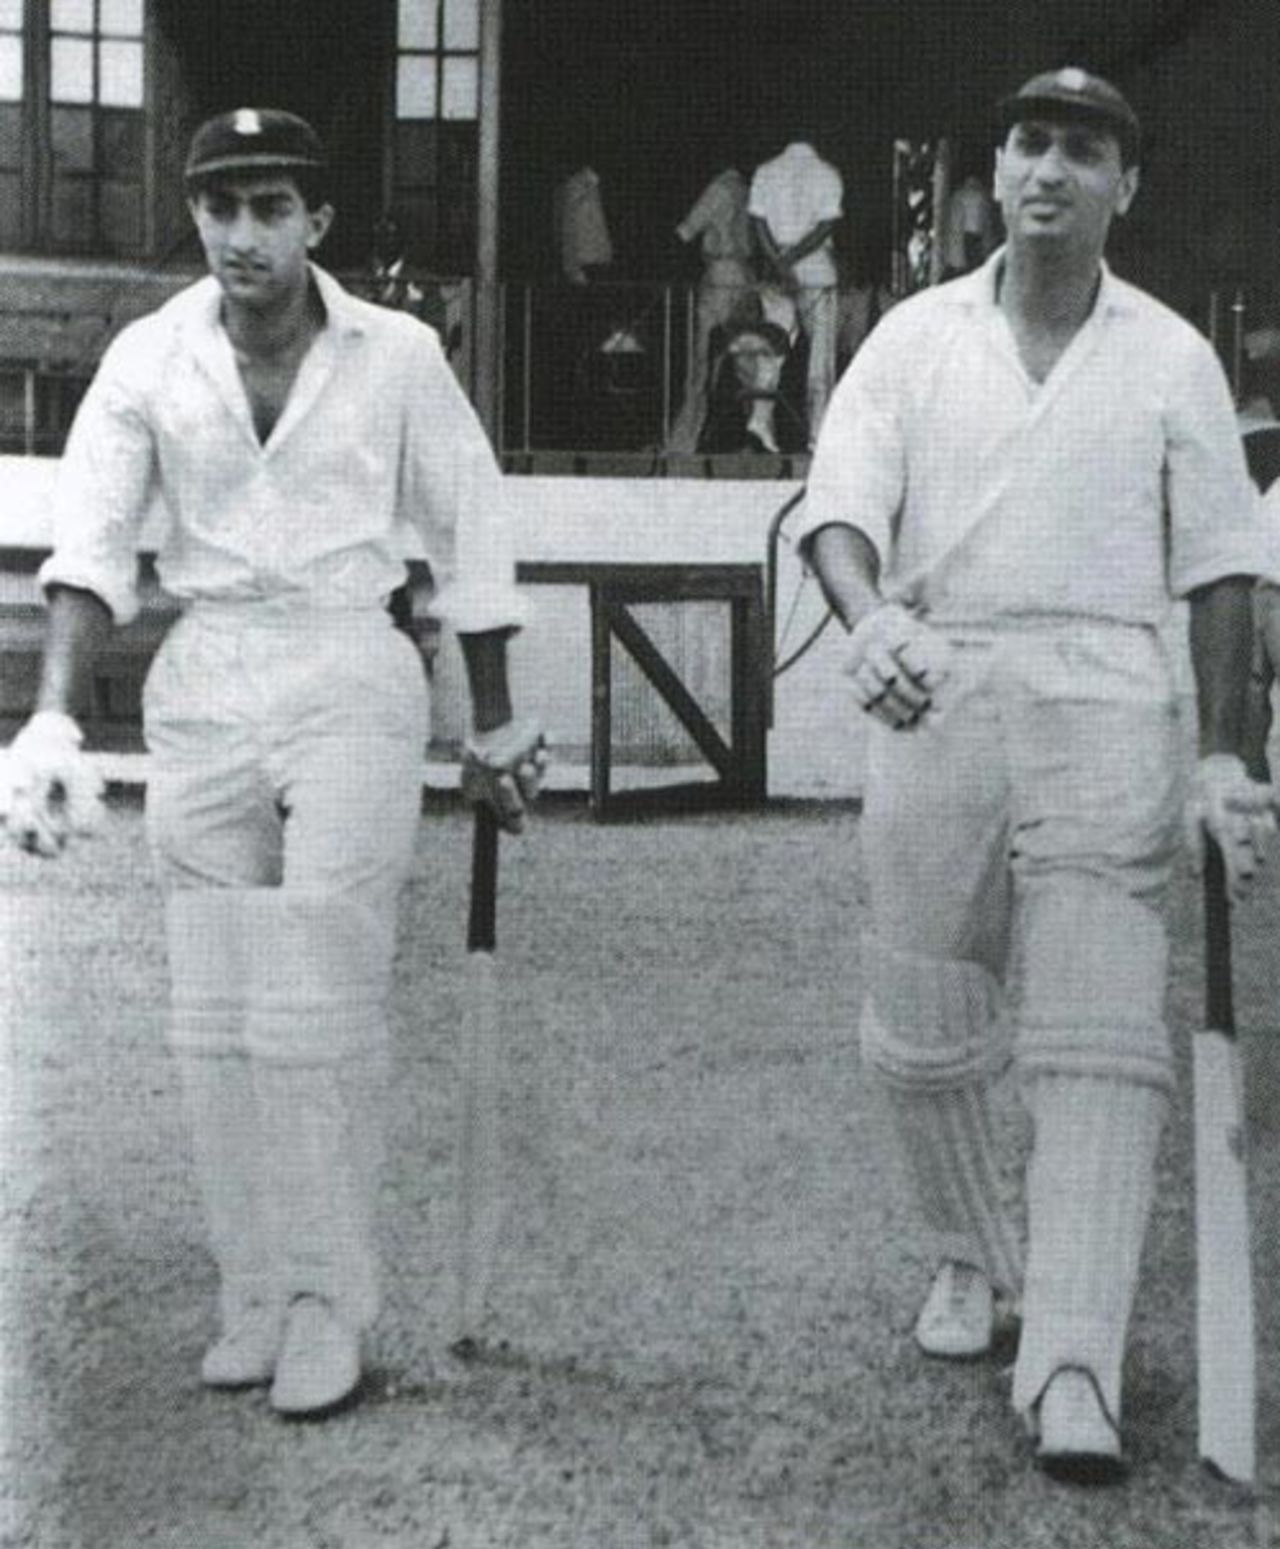 Polly Umrigar opening the batting with the Nawab of Pataudi, West Indies, 1962